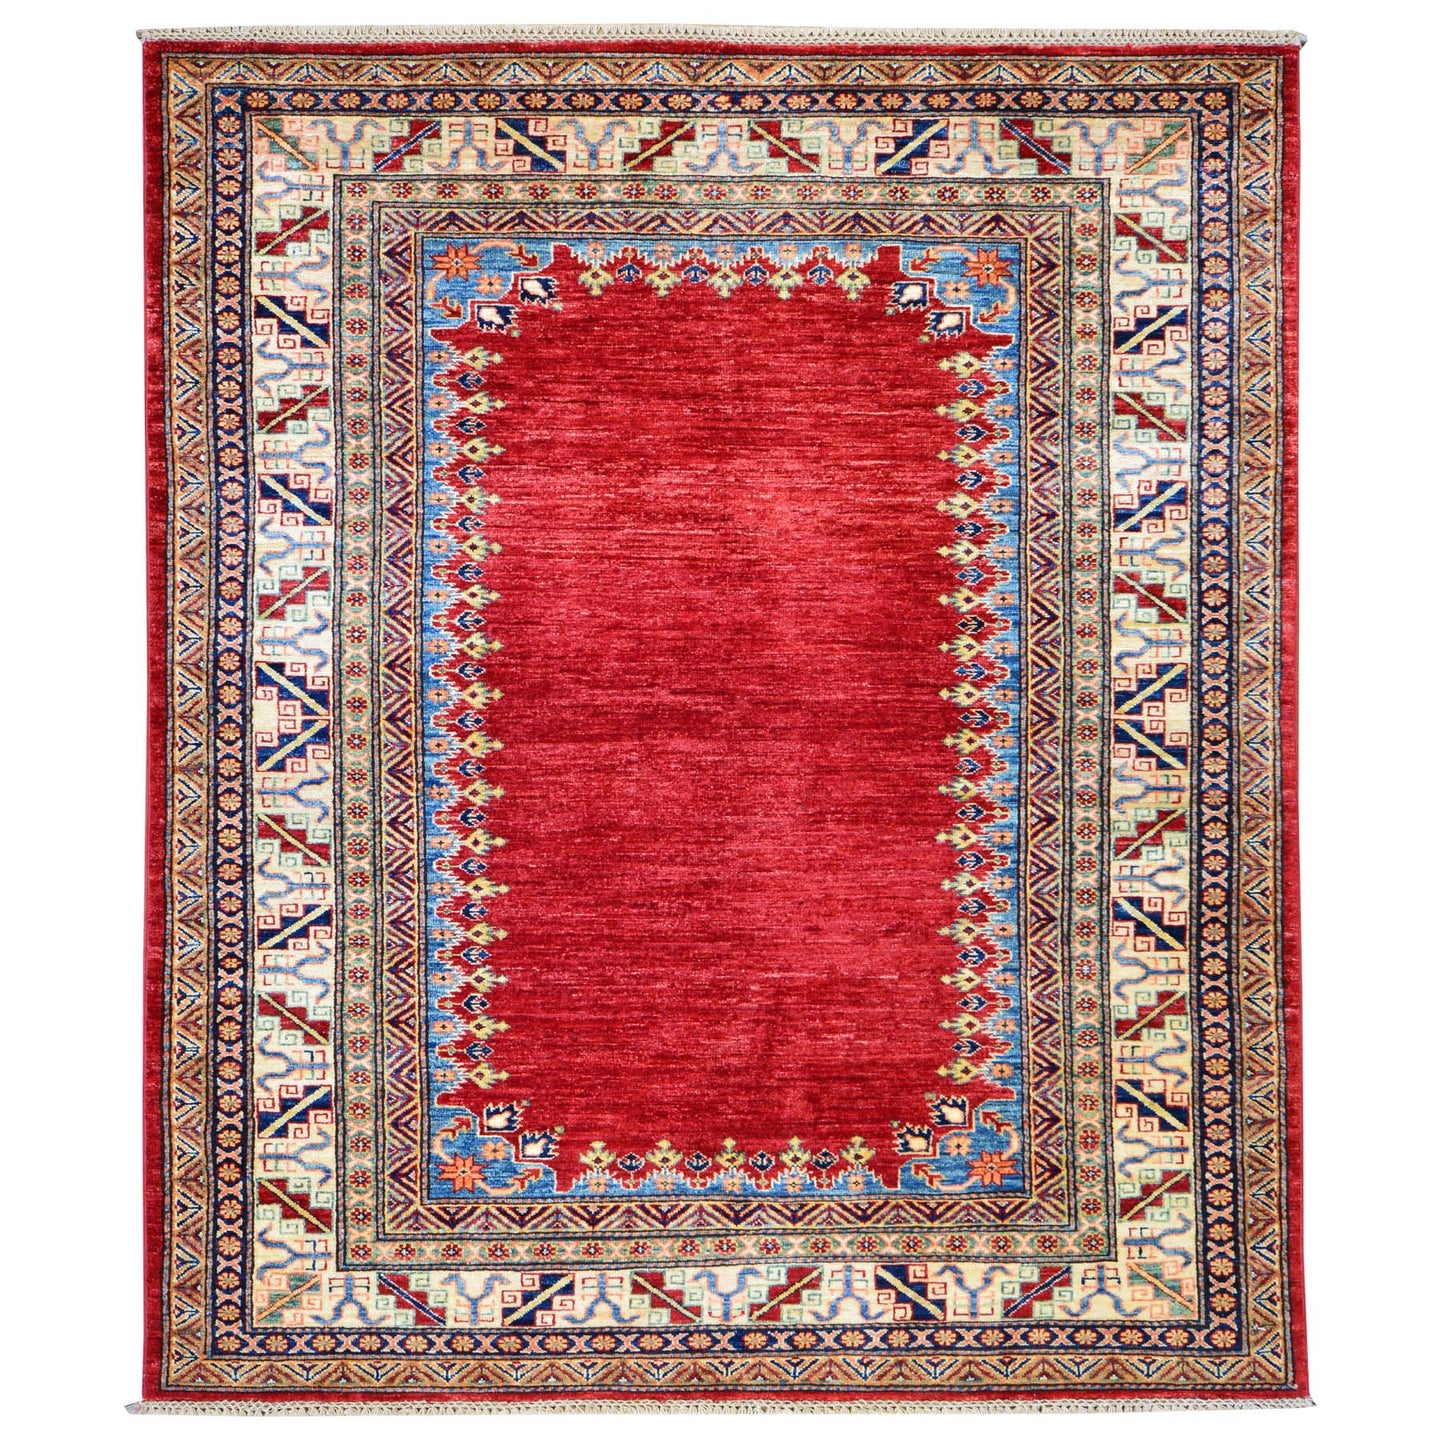 Oriental rugs, hand-knotted carpets, sustainable rugs, classic world oriental rugs, handmade, United States, interior design,  Brrsf-738